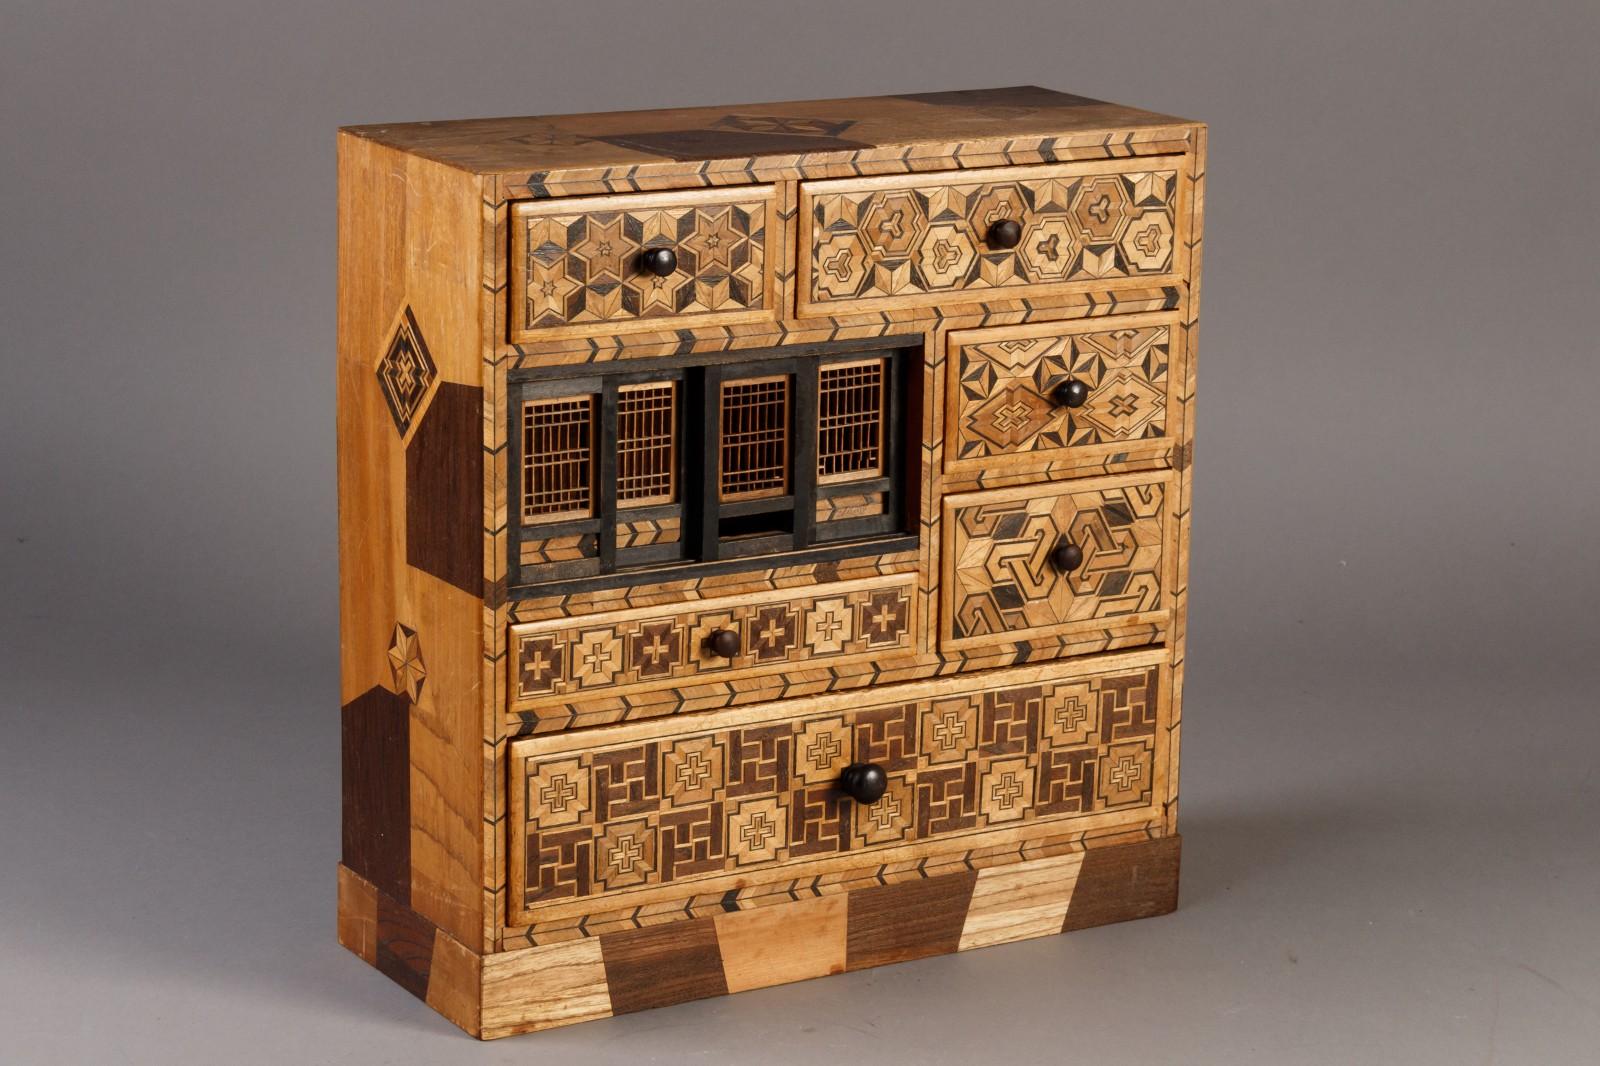 Charming table-top Japanese Yosegi (Yosegi-zaiku) jewelry box made of wood with Japanese decoration in black and inlaid designs of different woods, the  front with 6 drawers and 4 small sliding doors, Meiji period, early 20th C.
   